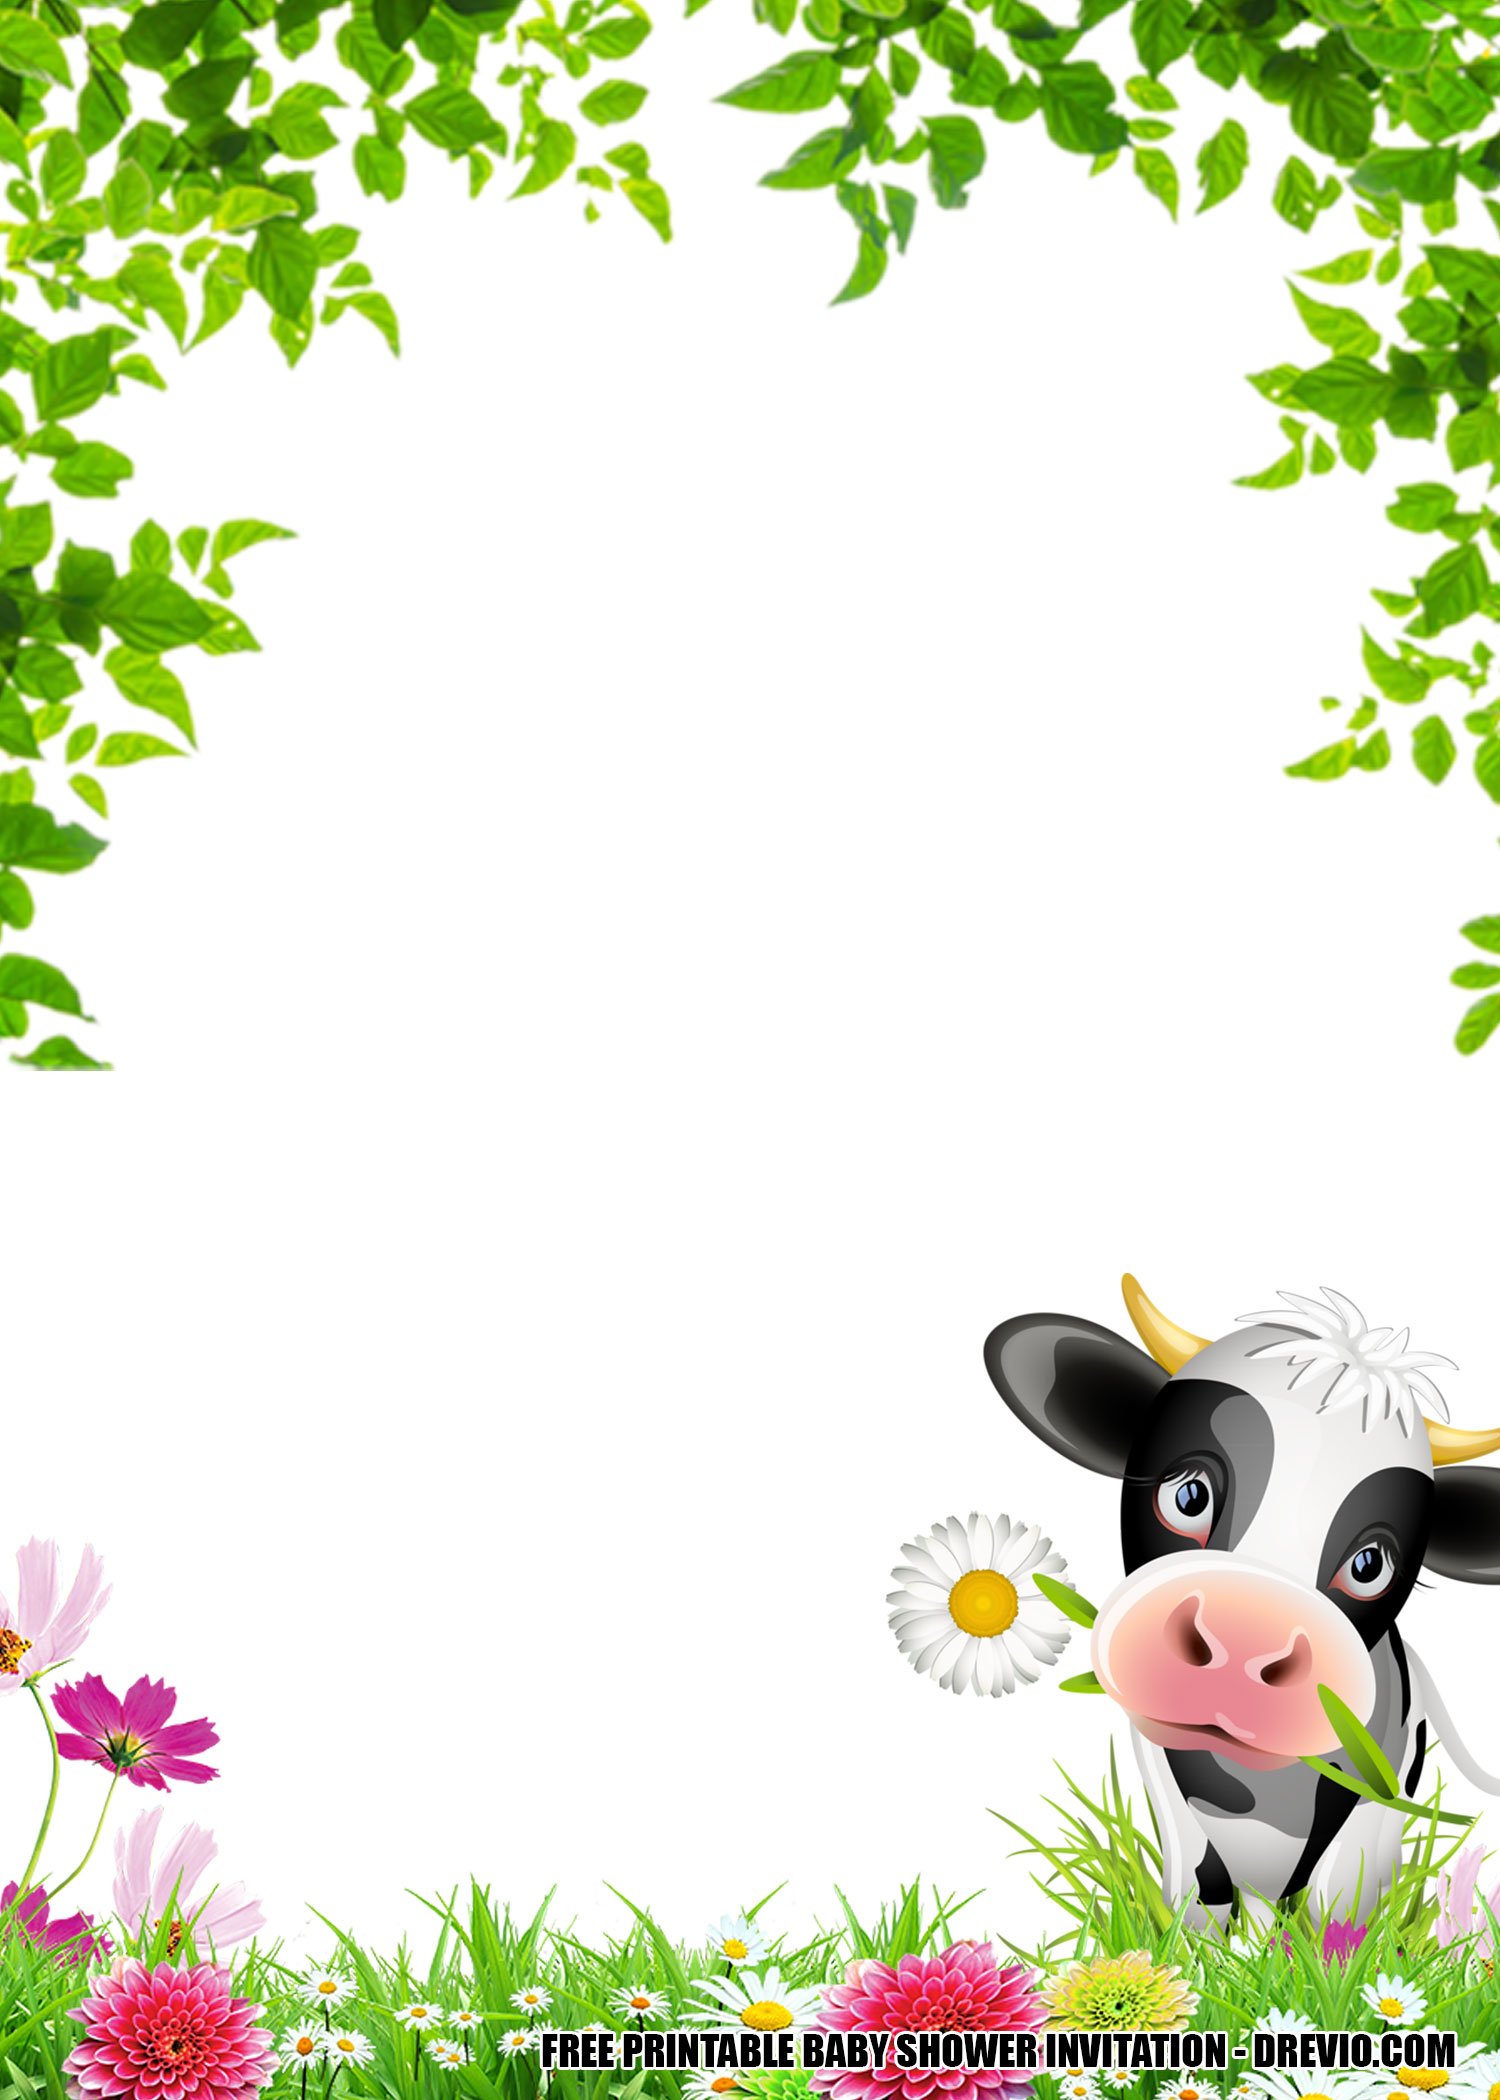 FREE Printable Cow Themed Baby Shower Invitation FREE Printable